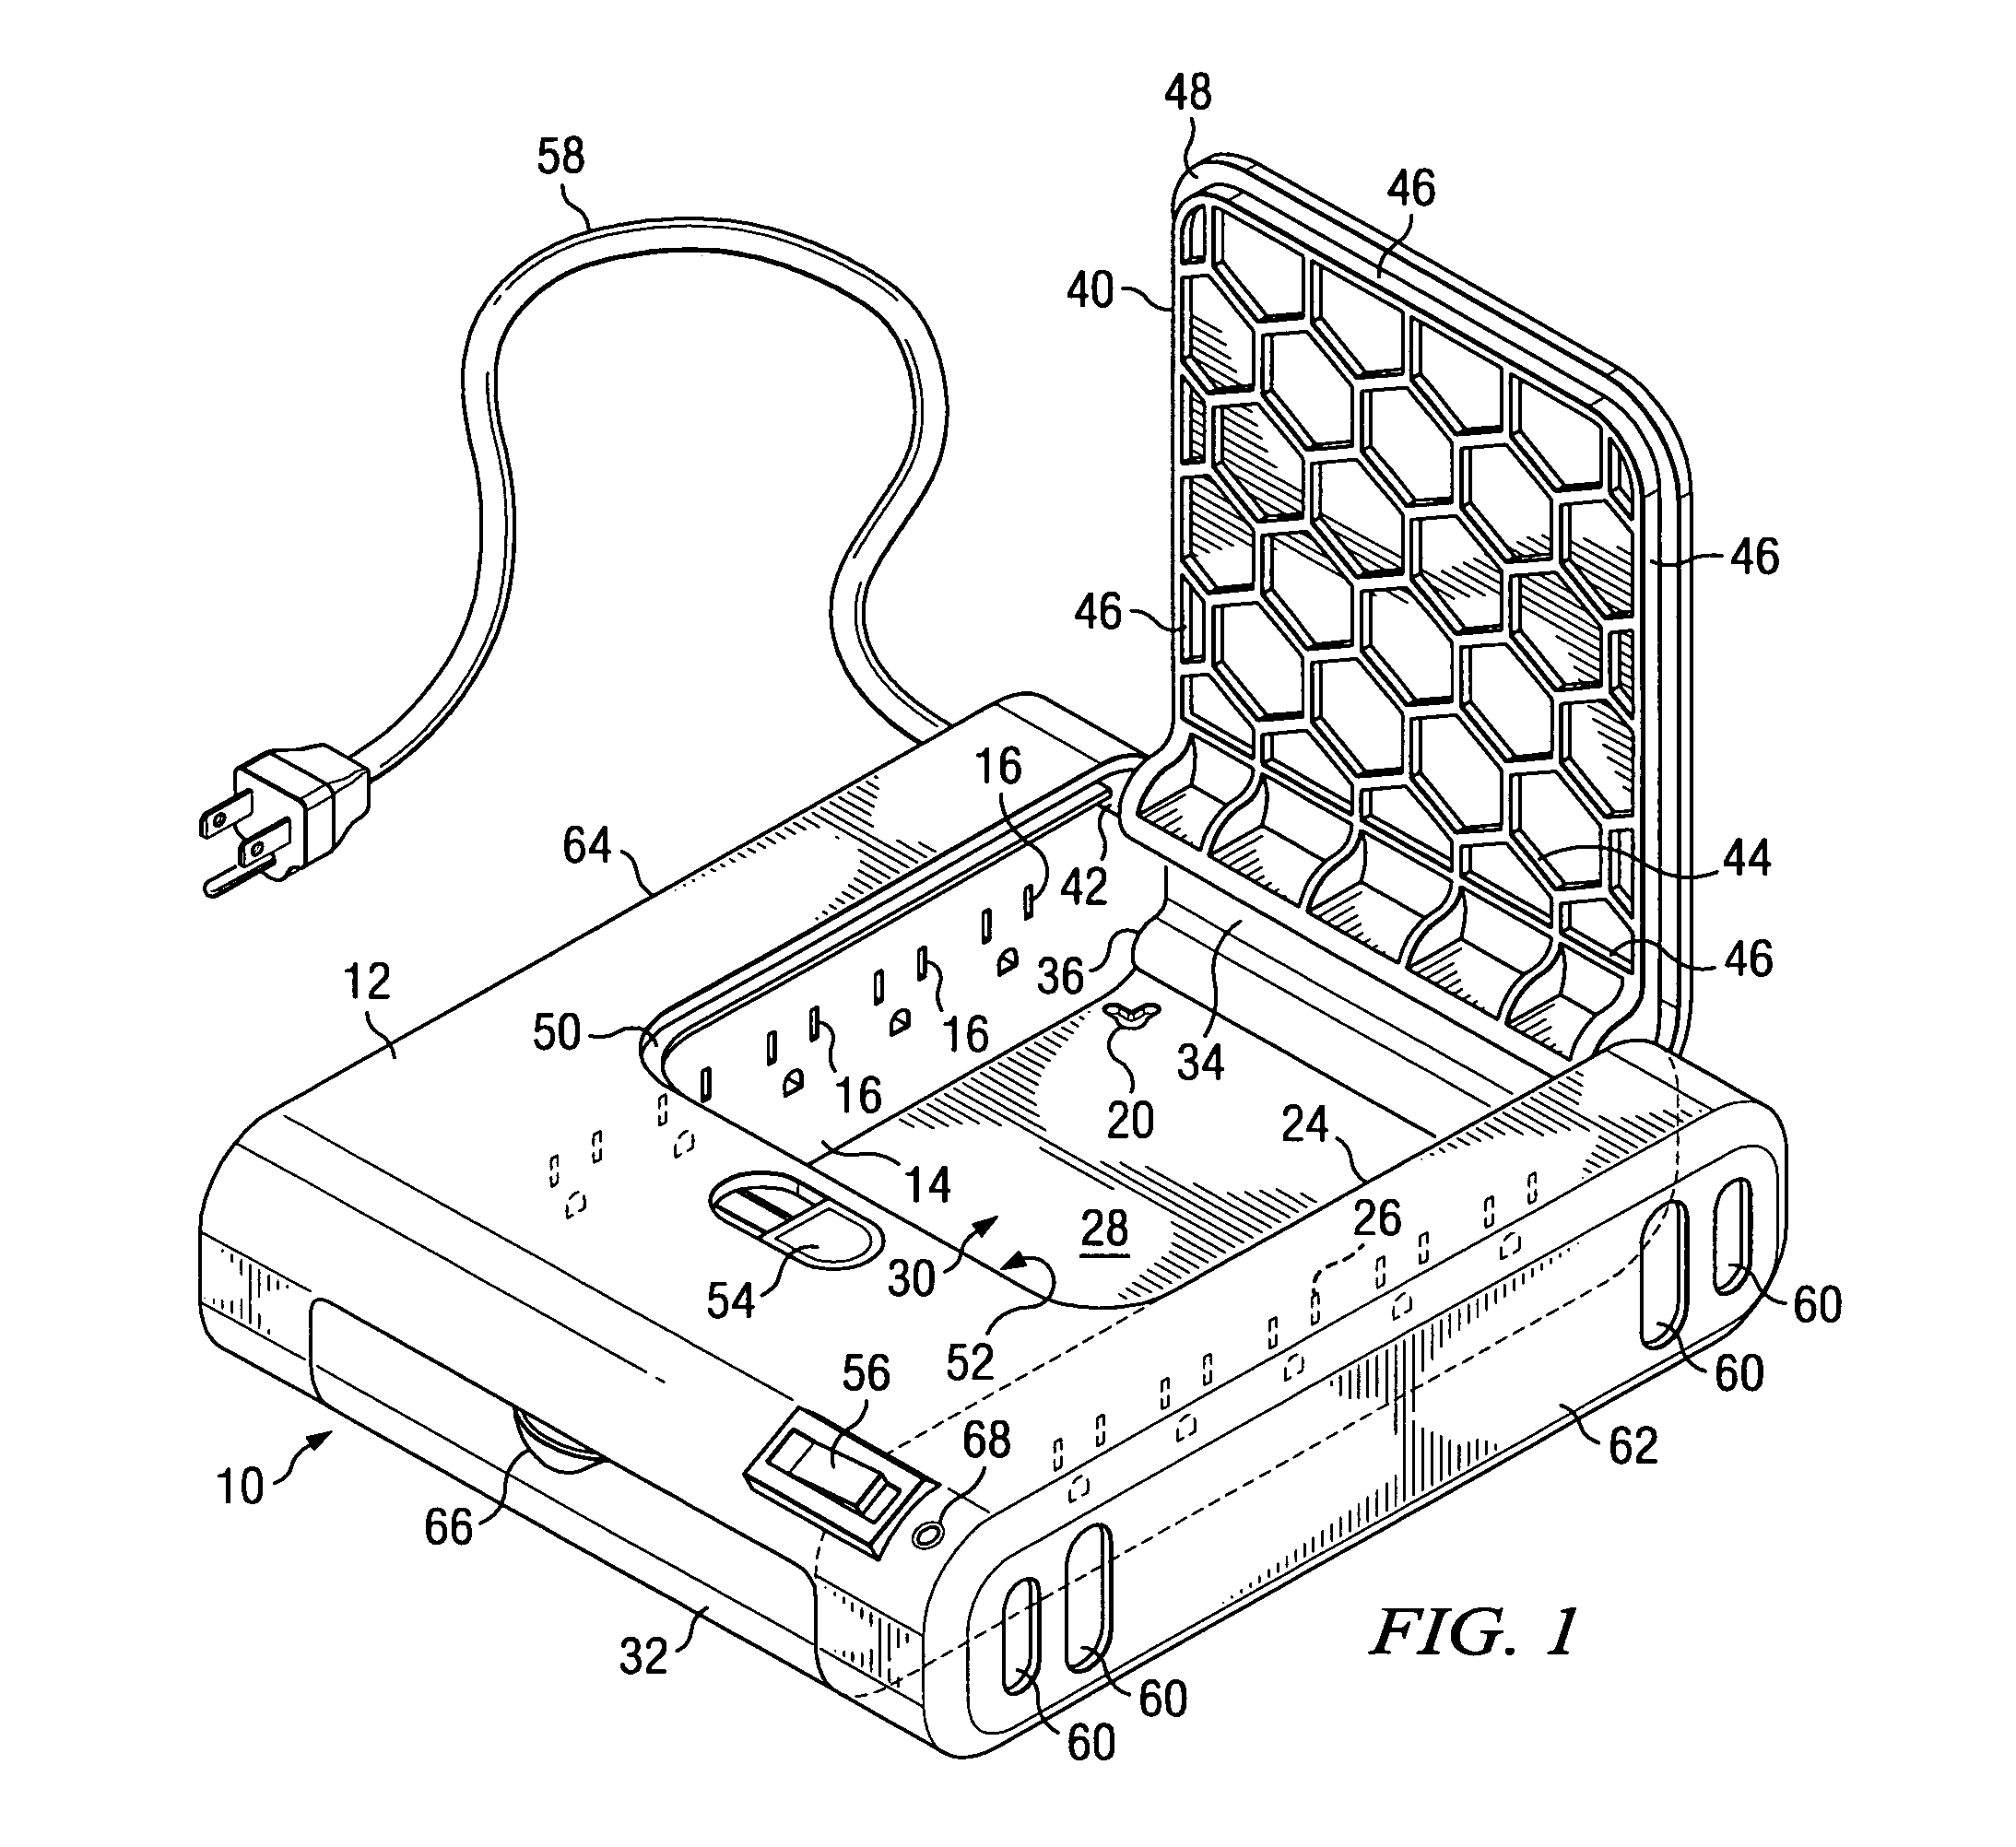 Apparatus for connecting and organizing cords and cables